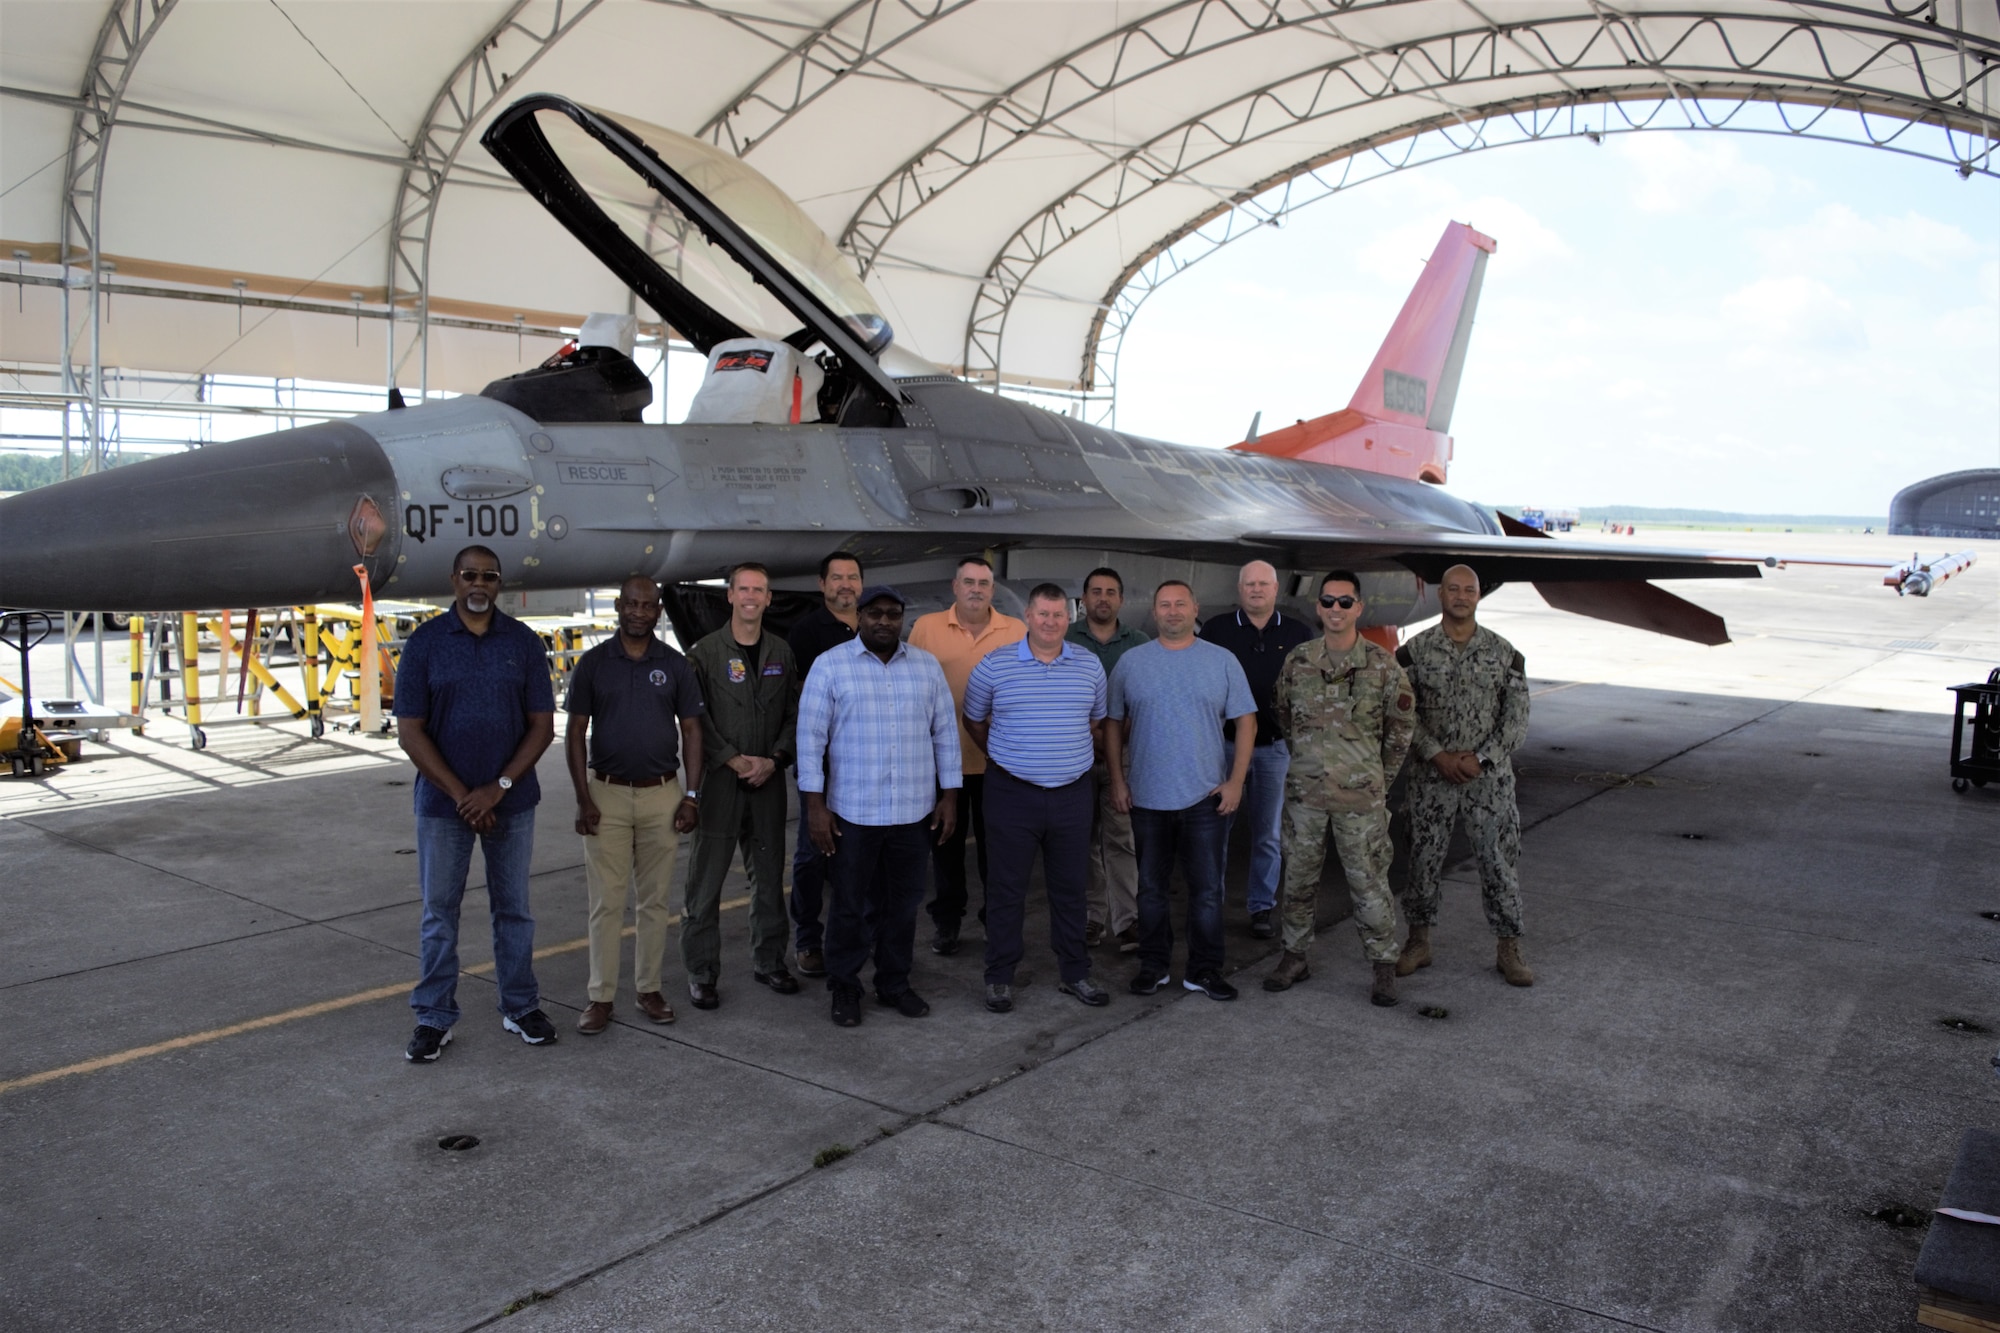 A group of civilian and military personnel stand in front of a plane